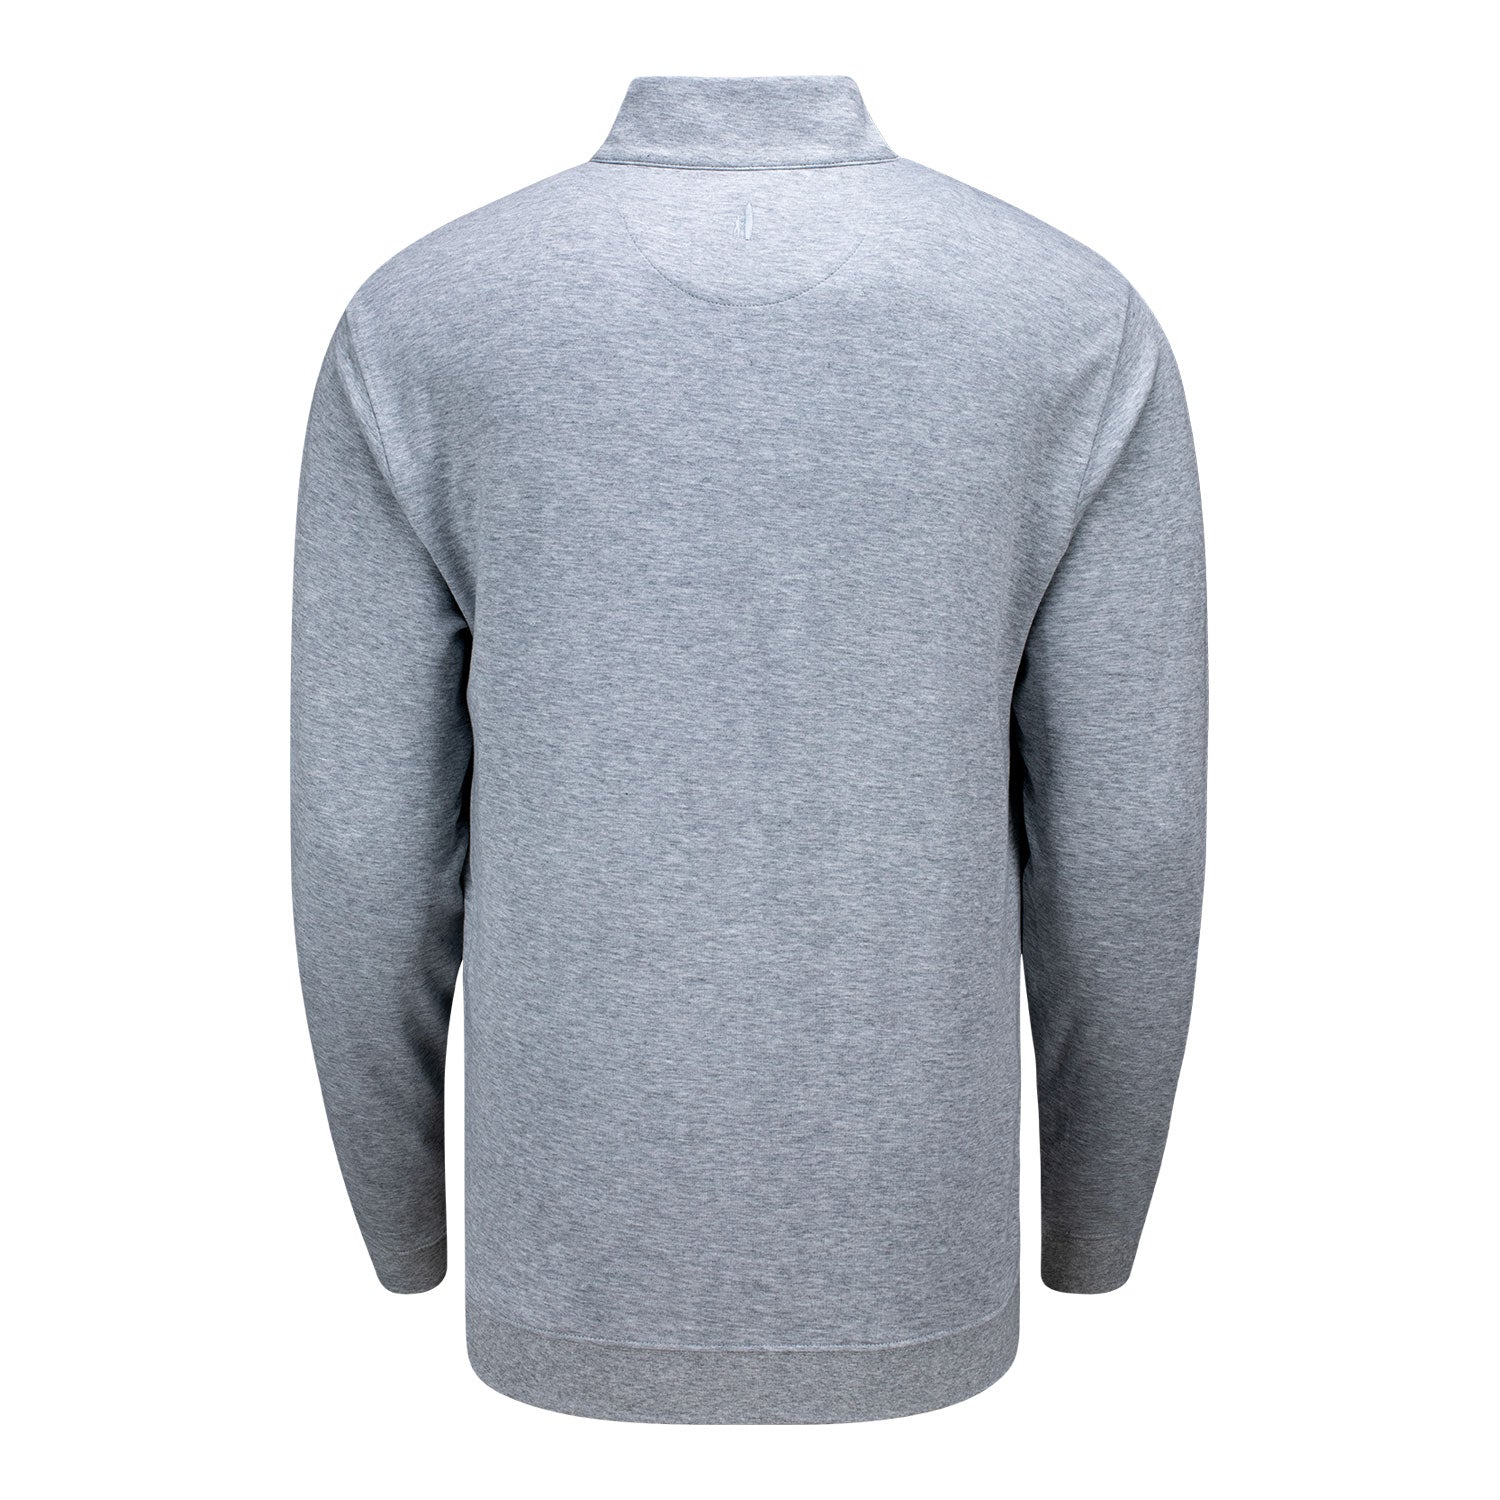 Johnnie-O 2025 Ryder Cup Cotton Quarter Zip in Heather Grey - Front View